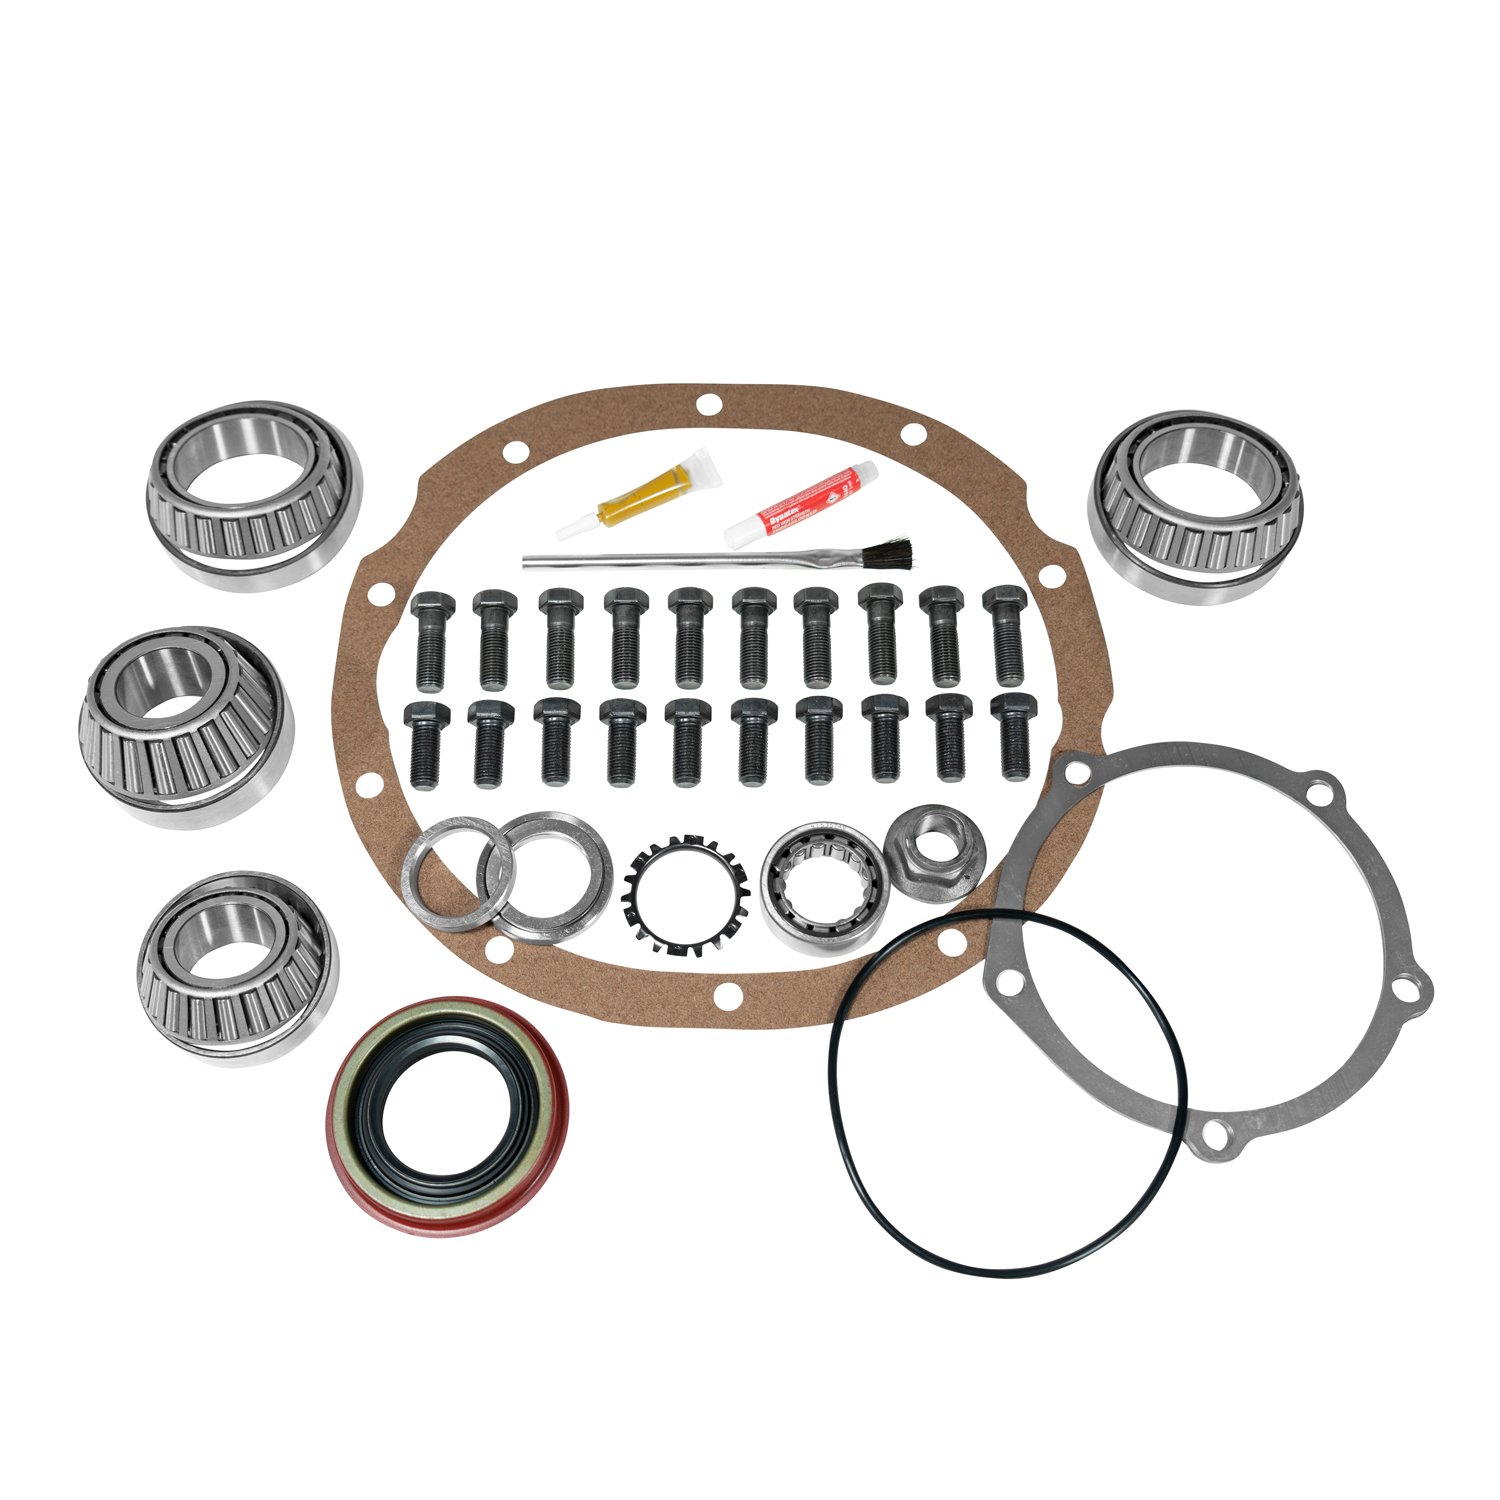 Master Overhaul Kit For Ford 9 in. Lm501310 Differential